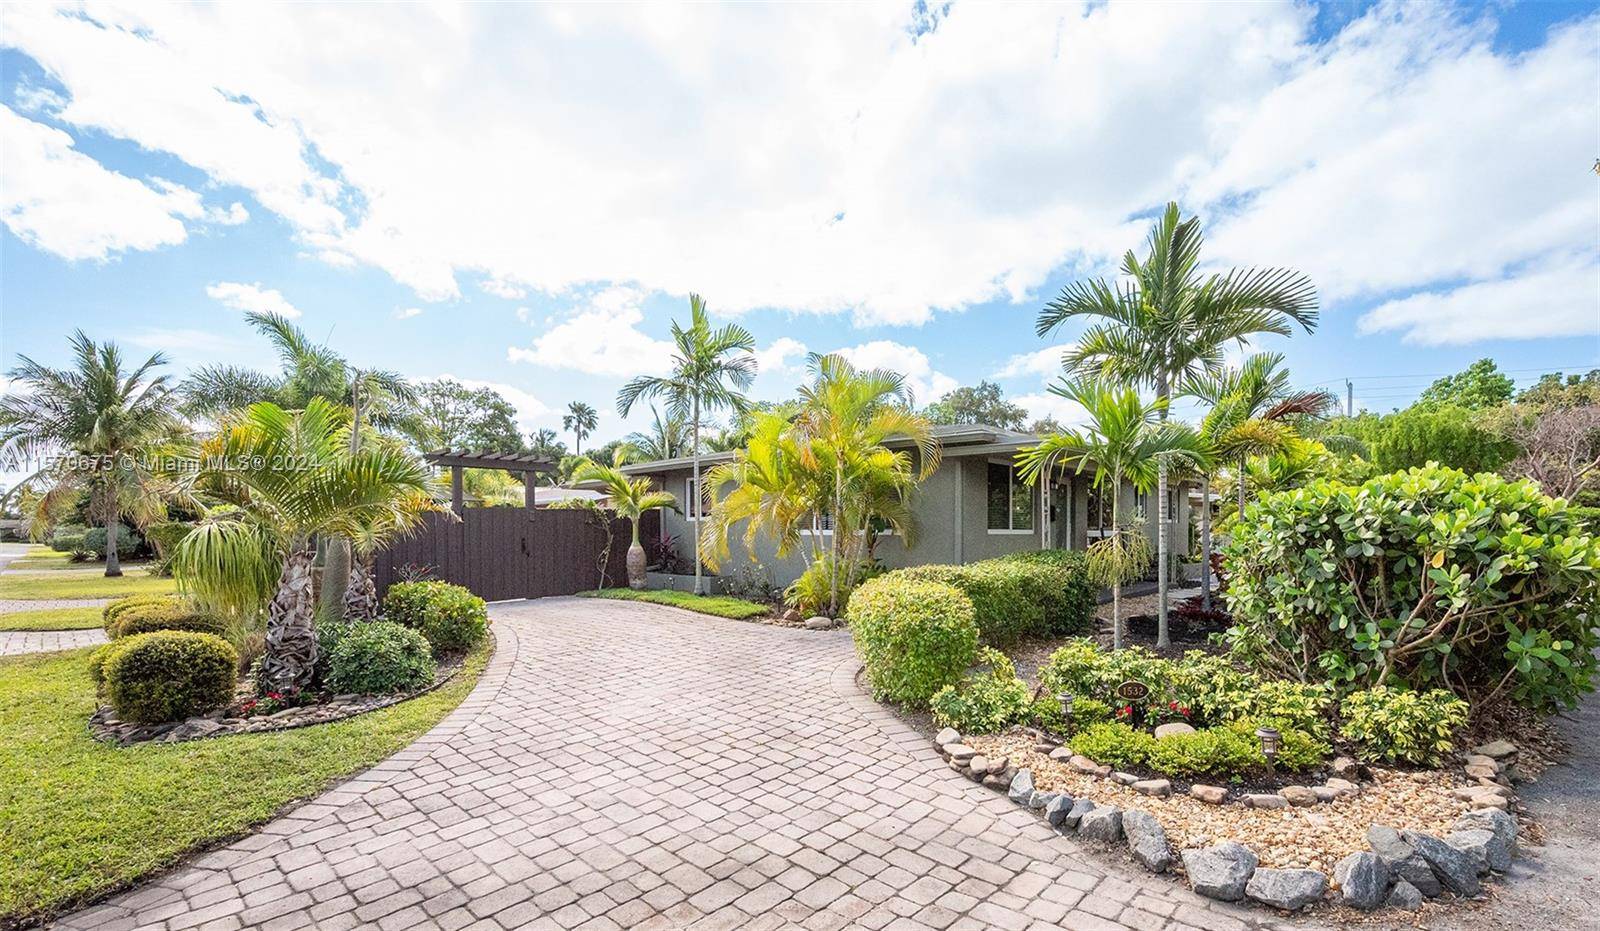 Nestled in Oakland Park's Corals neighborhood, this charming 3 bed, 2 bath residence on a corner lot is in a PRIME LOCATION and epitomizes Florida living.